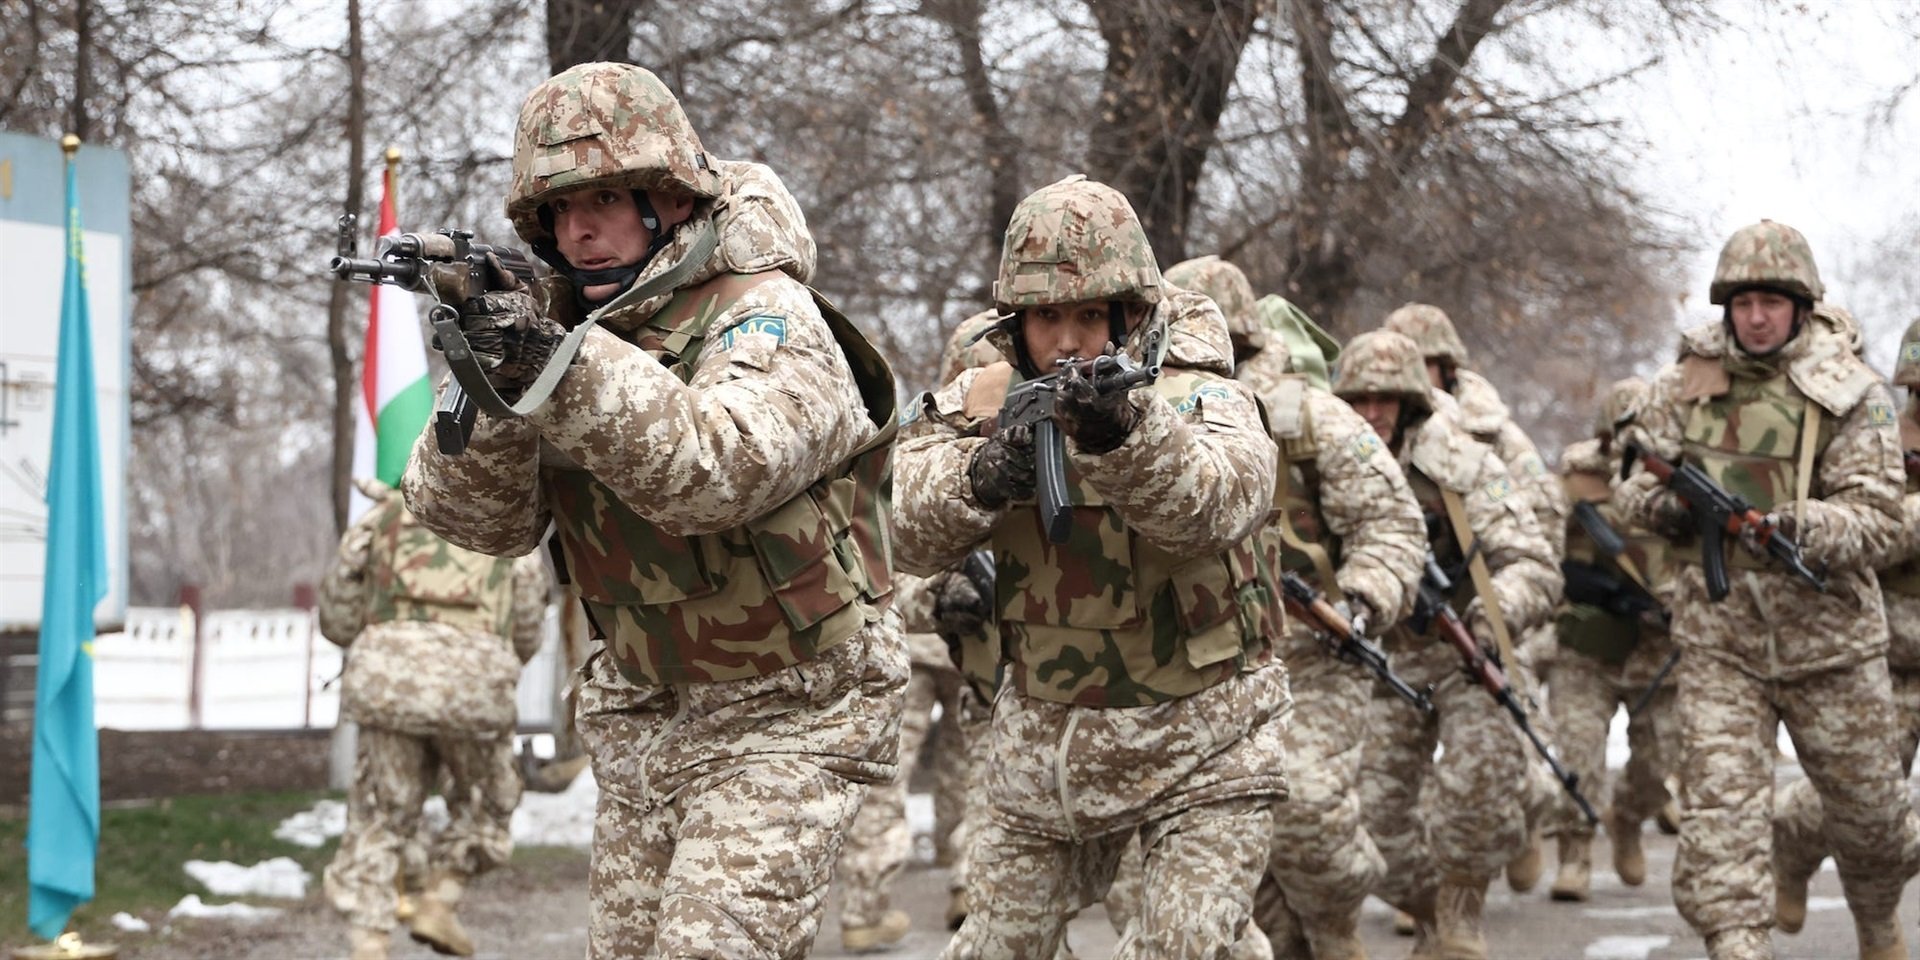 us-accuses-russia-of-readying-false-flag-operation-with-view-of-invading-ukraine-news24